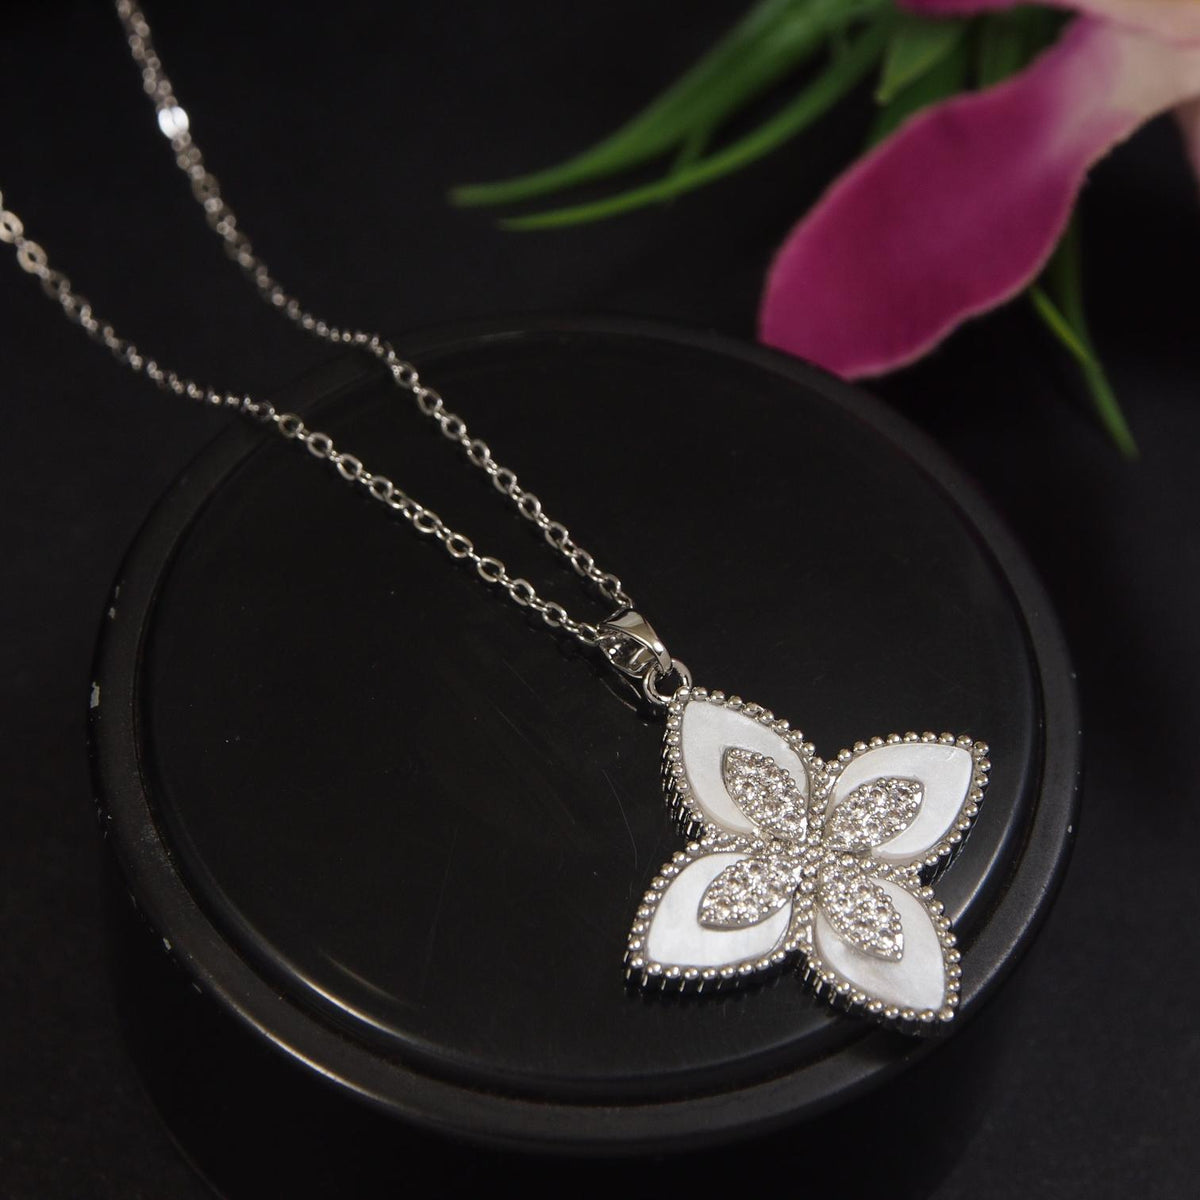 Stainless Steel Silver Clover Pendent Chain Necklace - STNK 4992